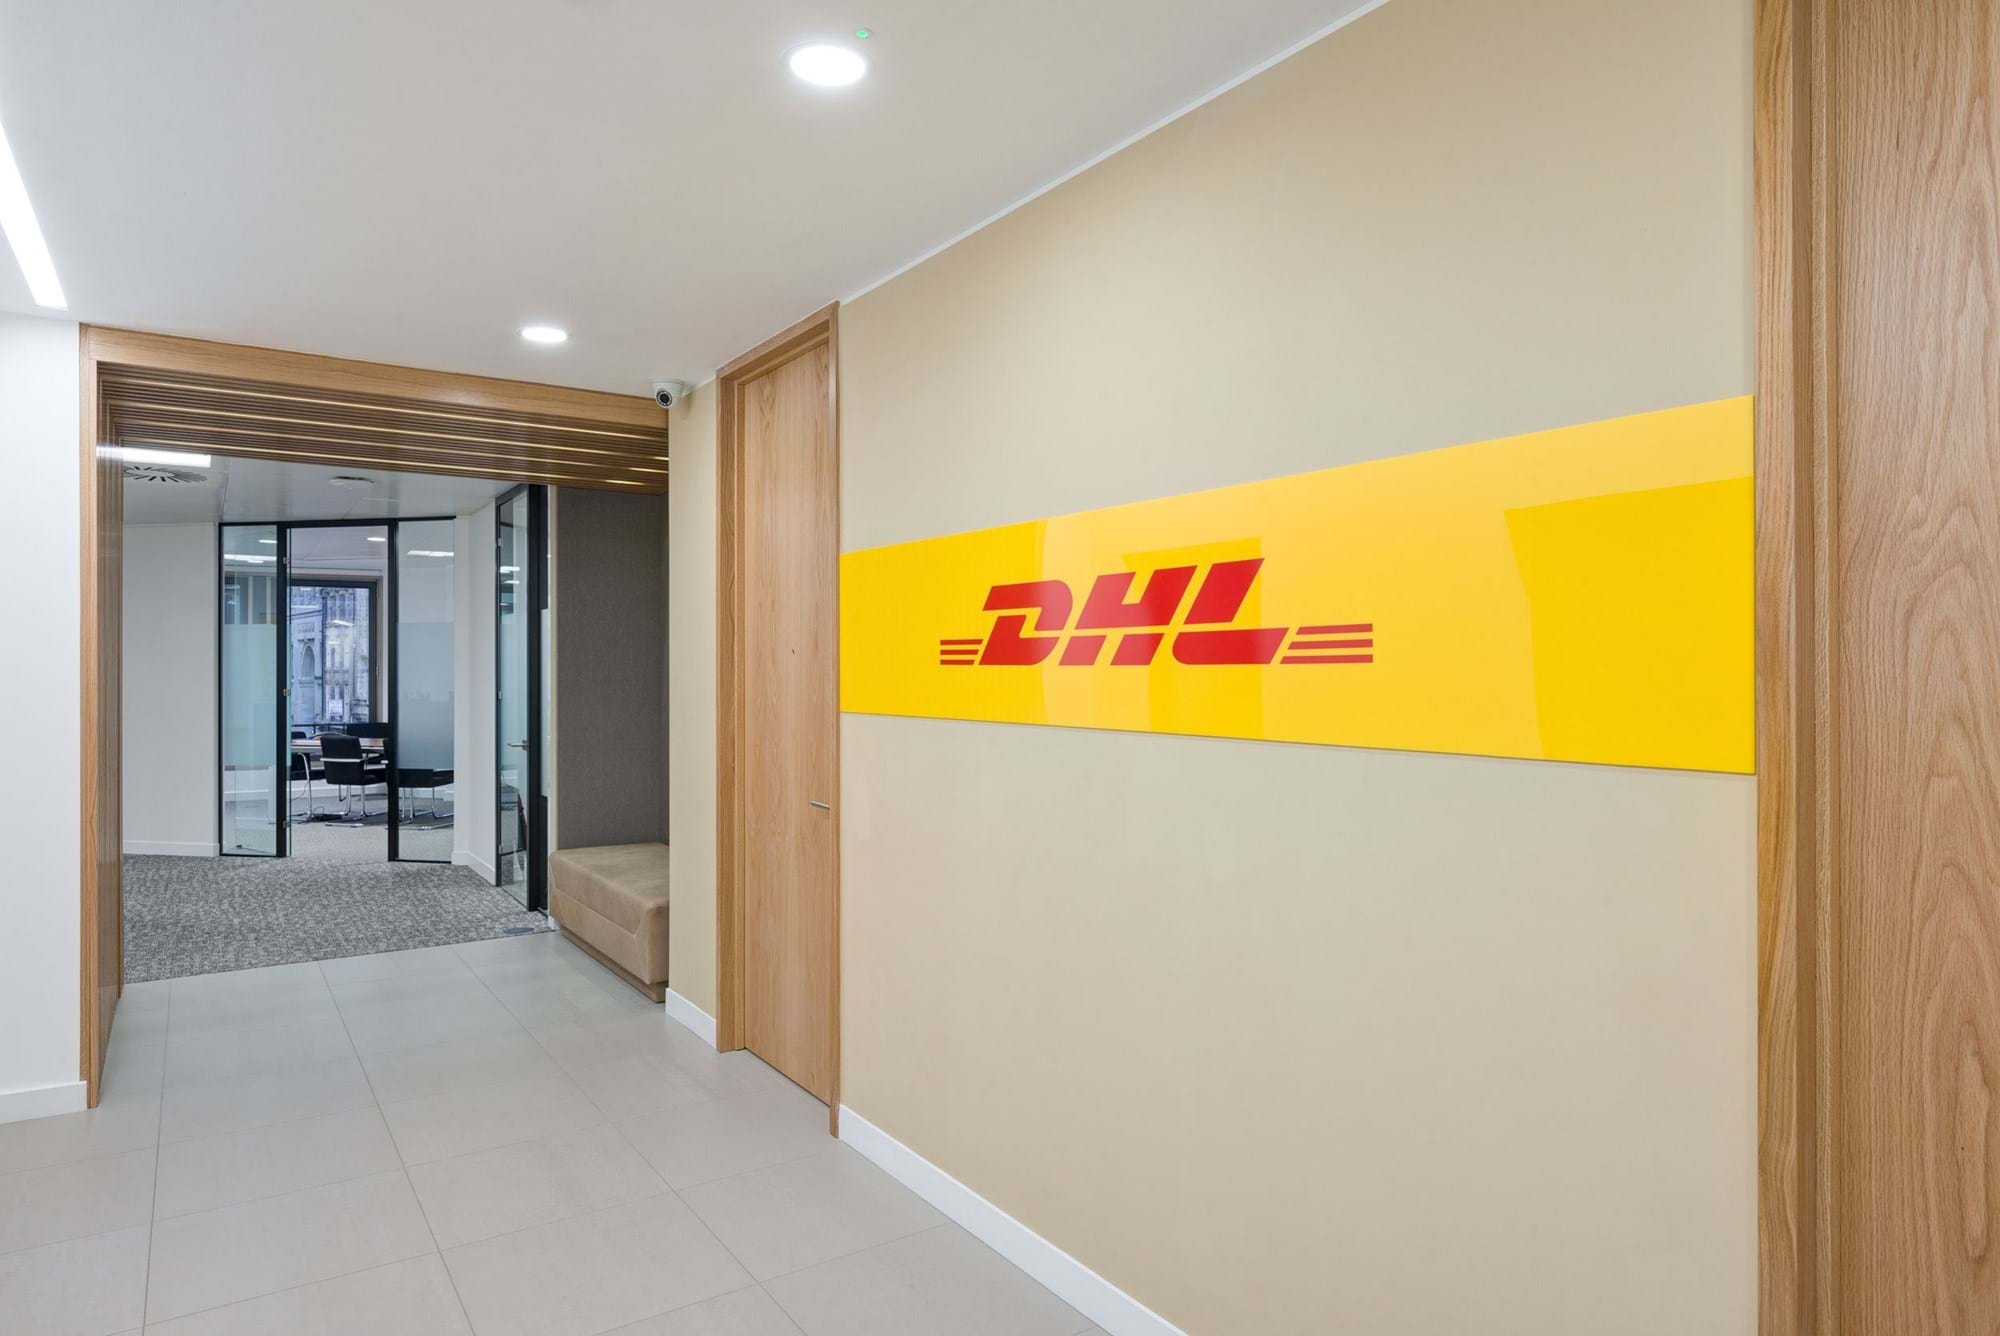 Modus Workspace office design, fit out and refurbishment - DPDHL - DHL 01 highres sRGB.jpg